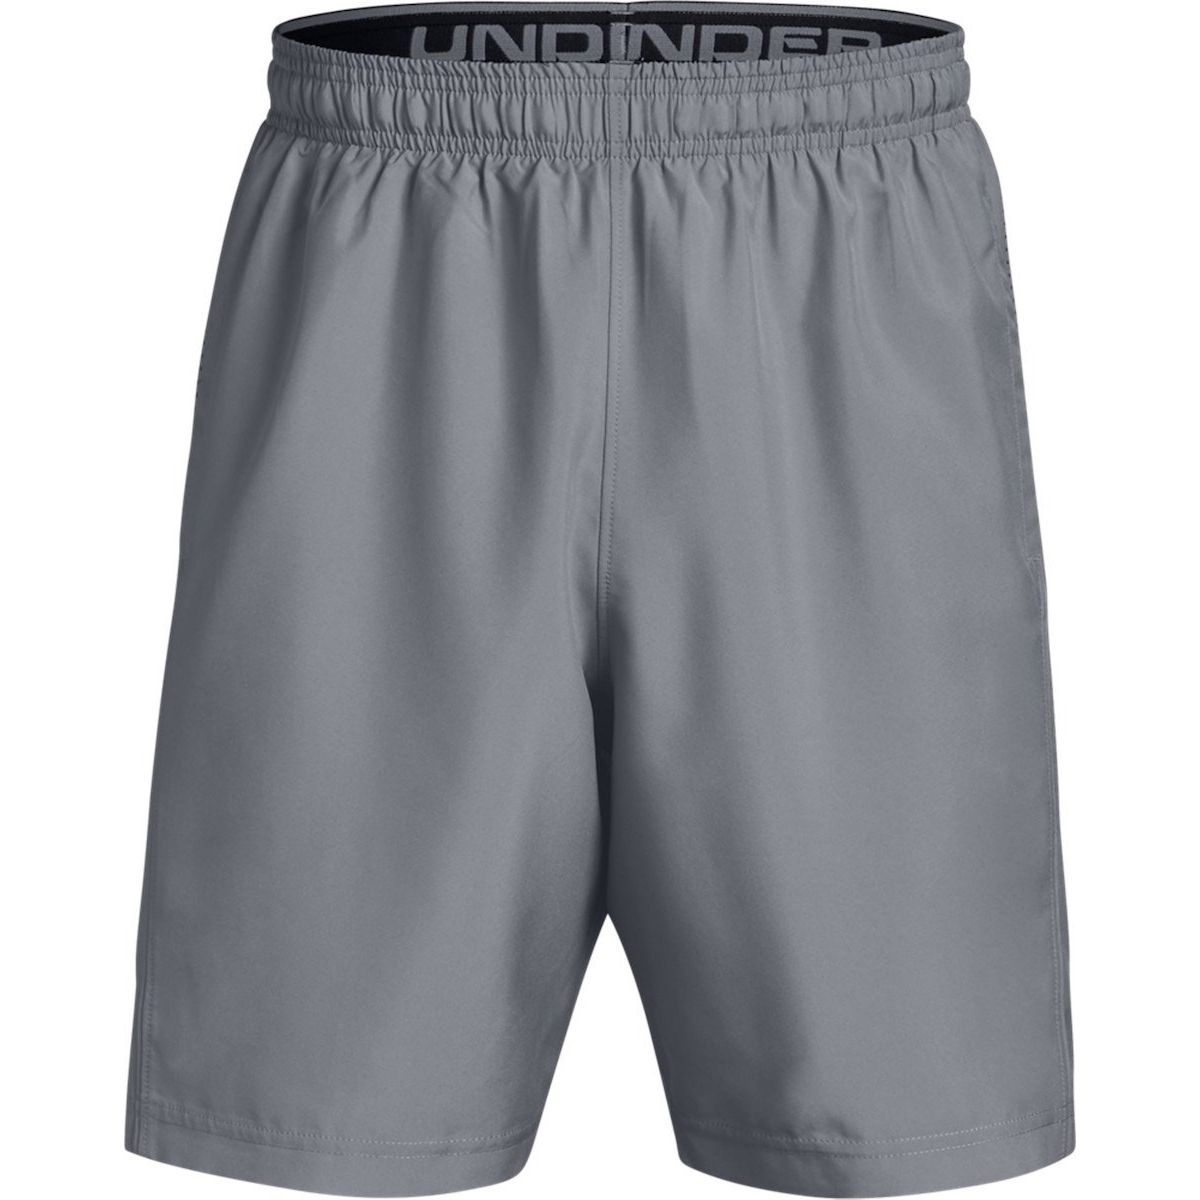 Under Armour Woven Graphic Men's Shorts 1309651-035